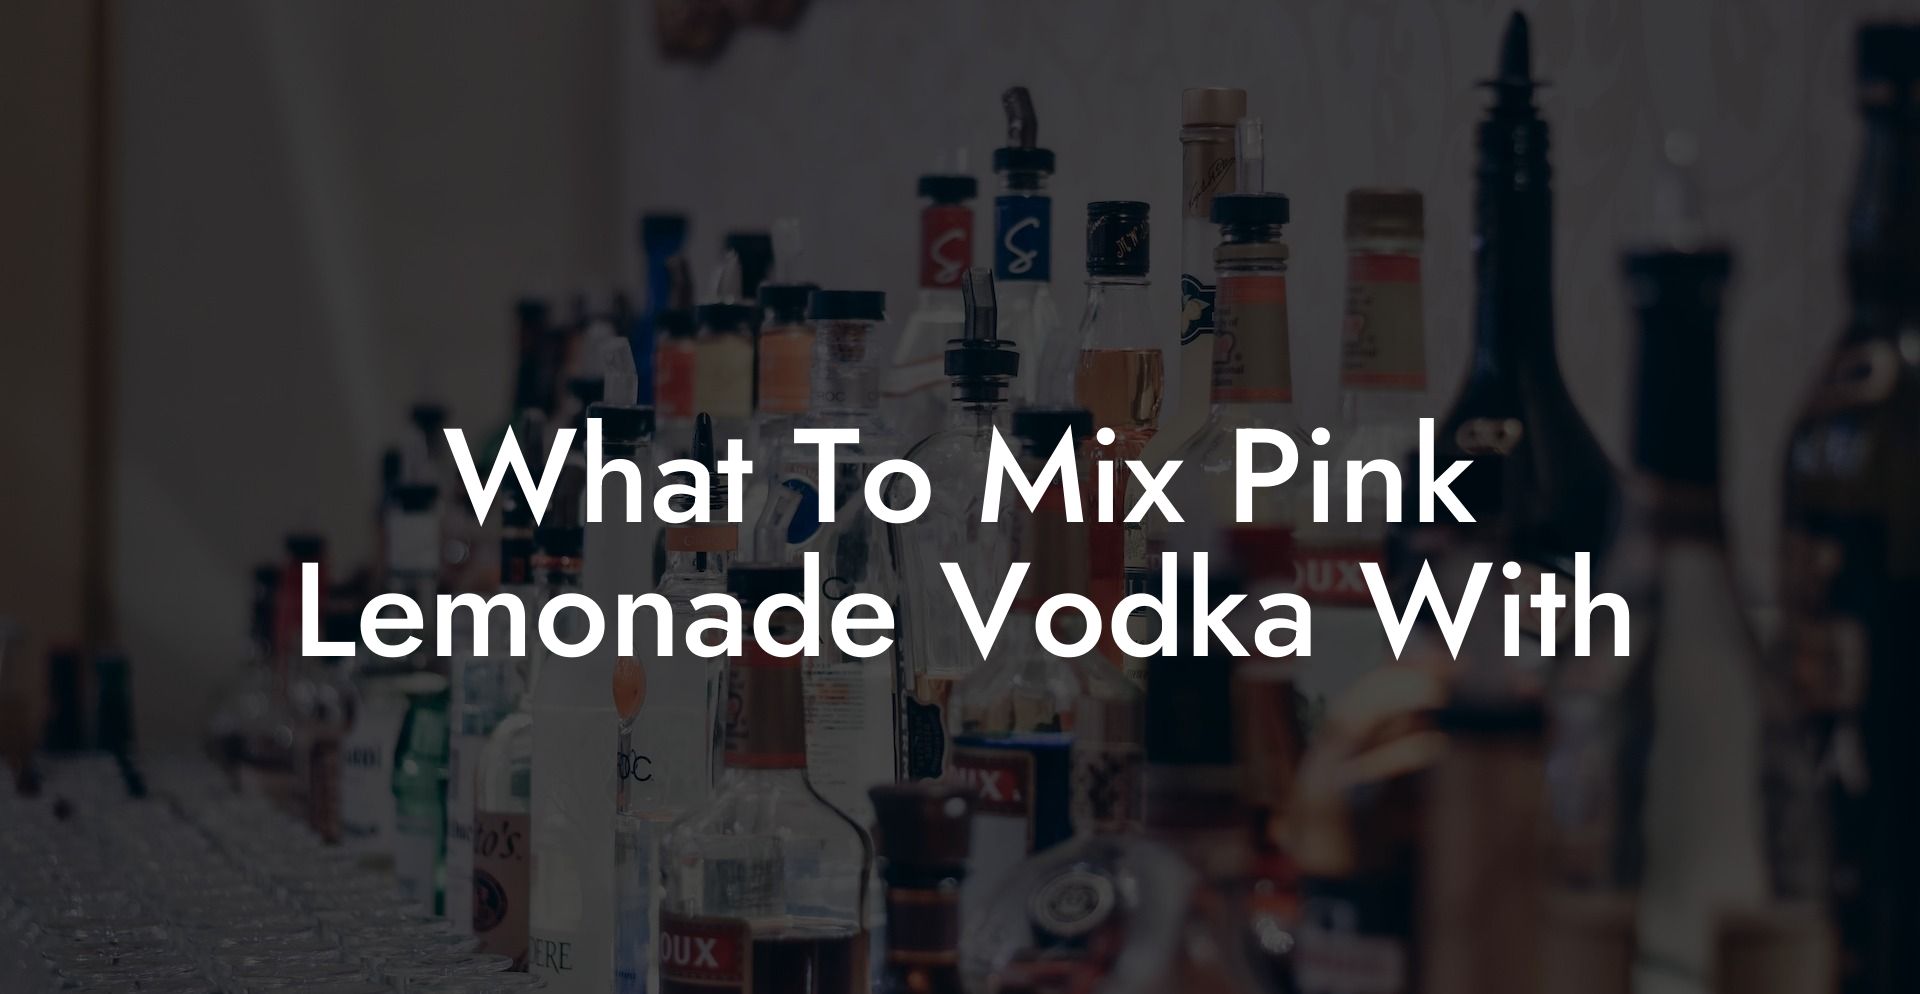 What To Mix Pink Lemonade Vodka With